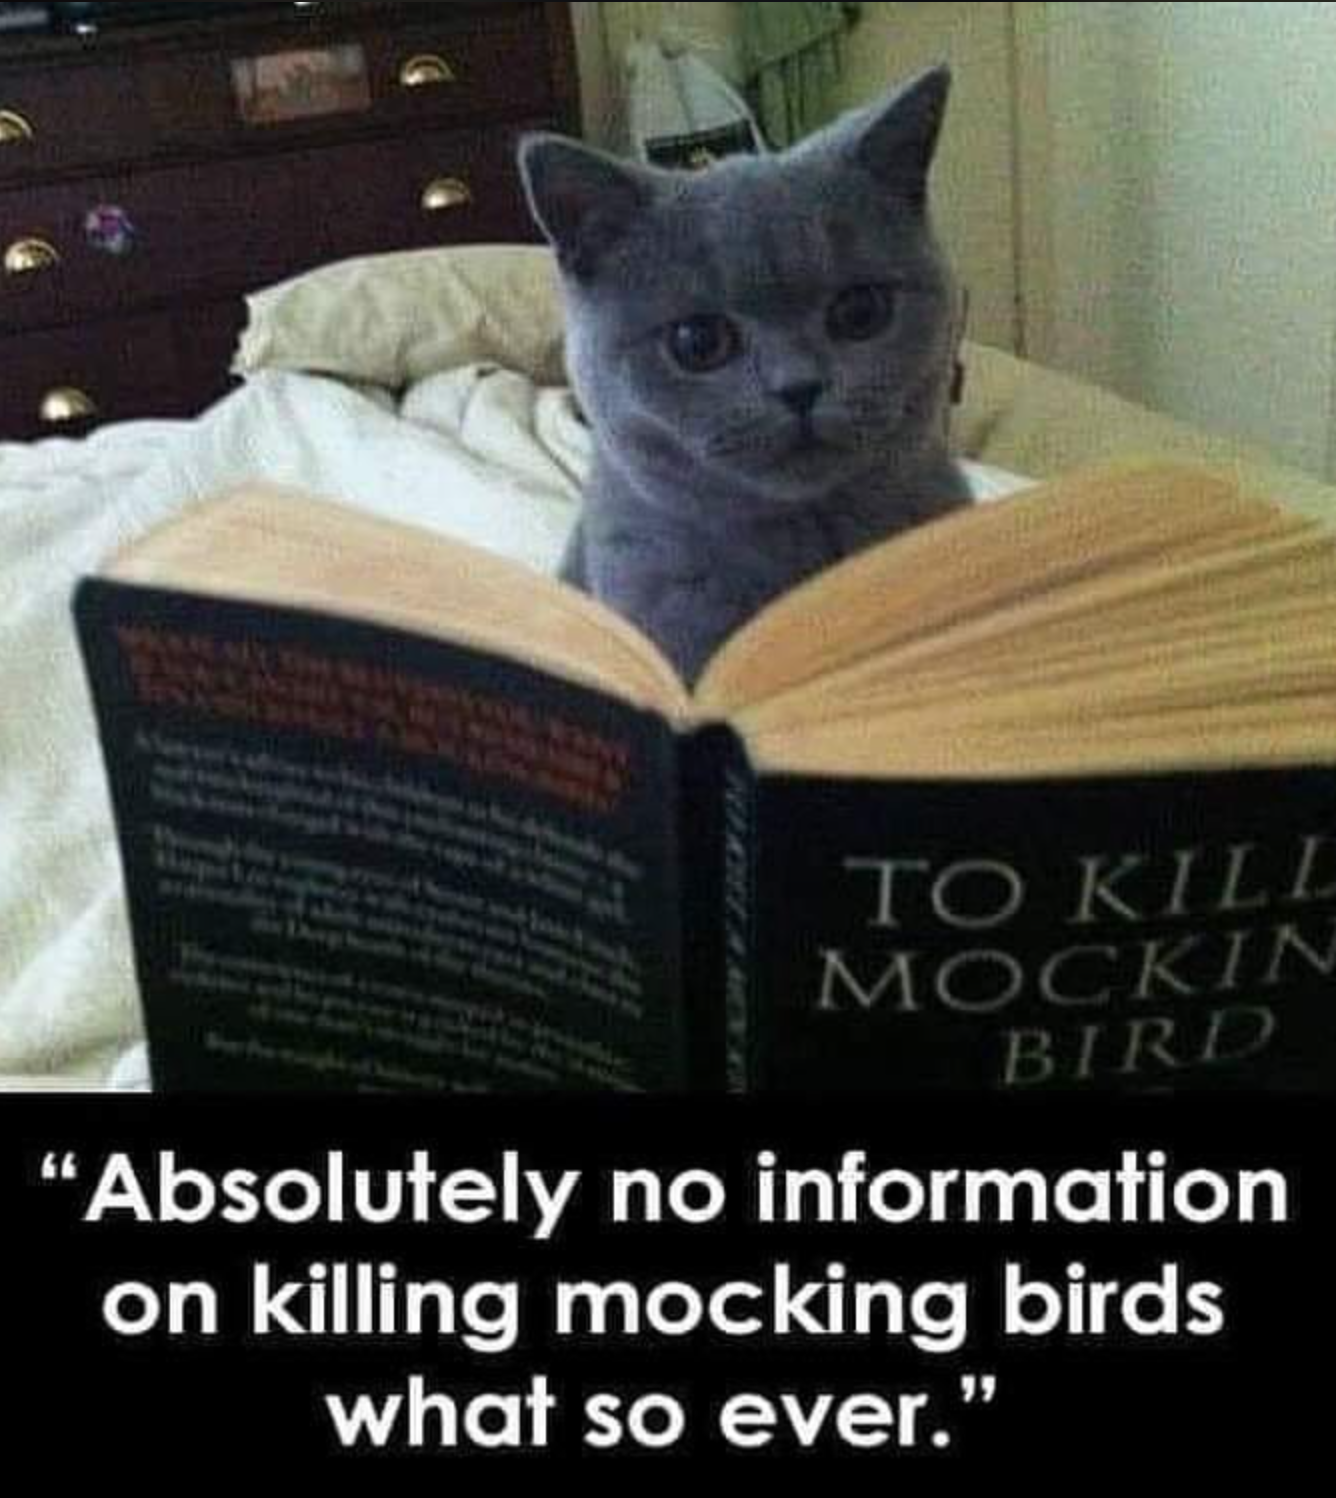 absolutely no information on killing mockingbirds - To Kill Mockin Bird Absolutely no information on killing mocking birds what so ever."